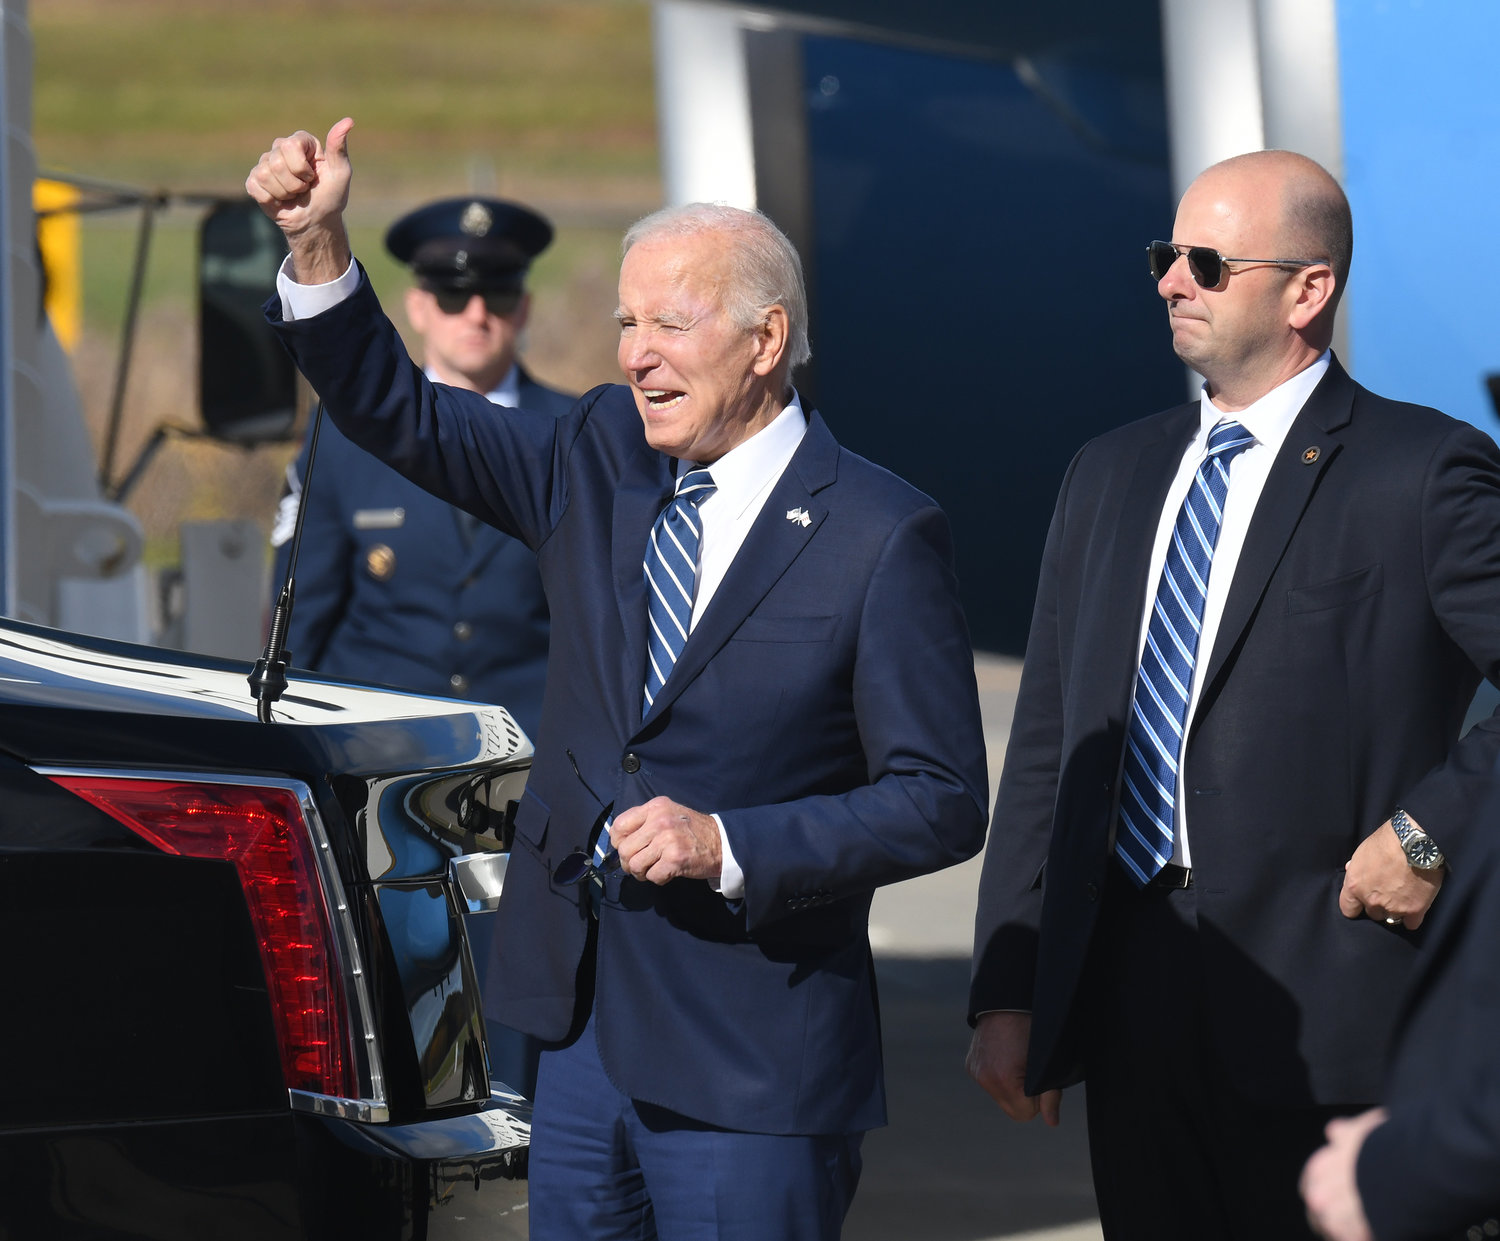 GREETINGS — President Joseph Biden waves to family and friends gathered at Syracuse's Hancock International Airport to welcome the 46th president of the United States upon his arrival to Syracuse on Thursday, Oct. 27. Following his arrival on Air Force One, Biden was wisked away in a large motorcade from the airport down Route 81 as he headed to Onondaga Community College to discuss the new Micron factory and its impacts on upstate New York and the nation. With Biden is a member of his security detail.